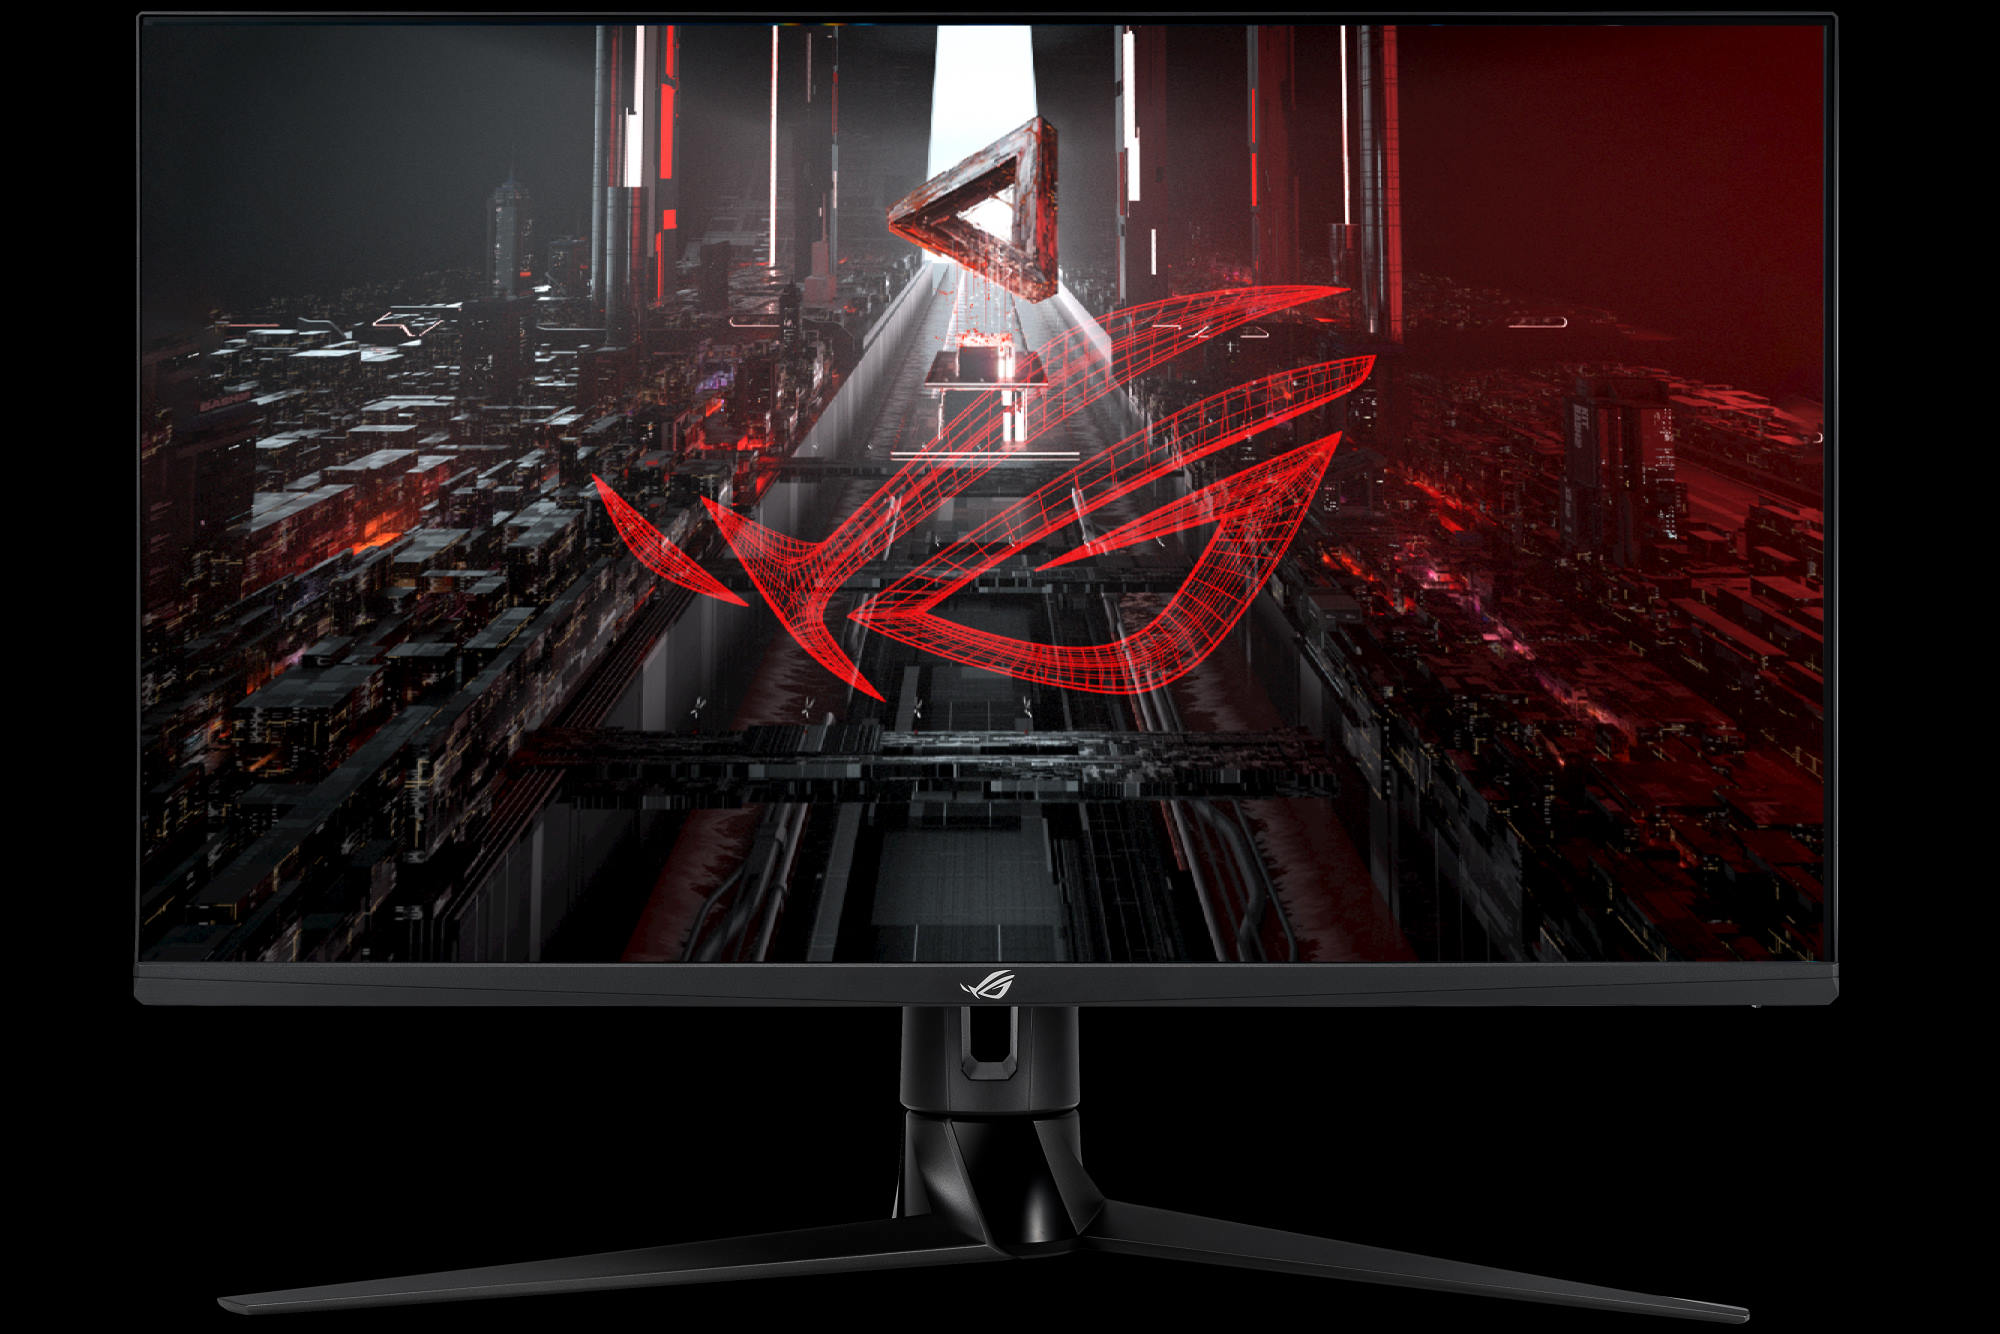 The ROG Swift PG32UQ display is ready to impress every gamer with HDMI 2.1  and a 32” 4K canvas